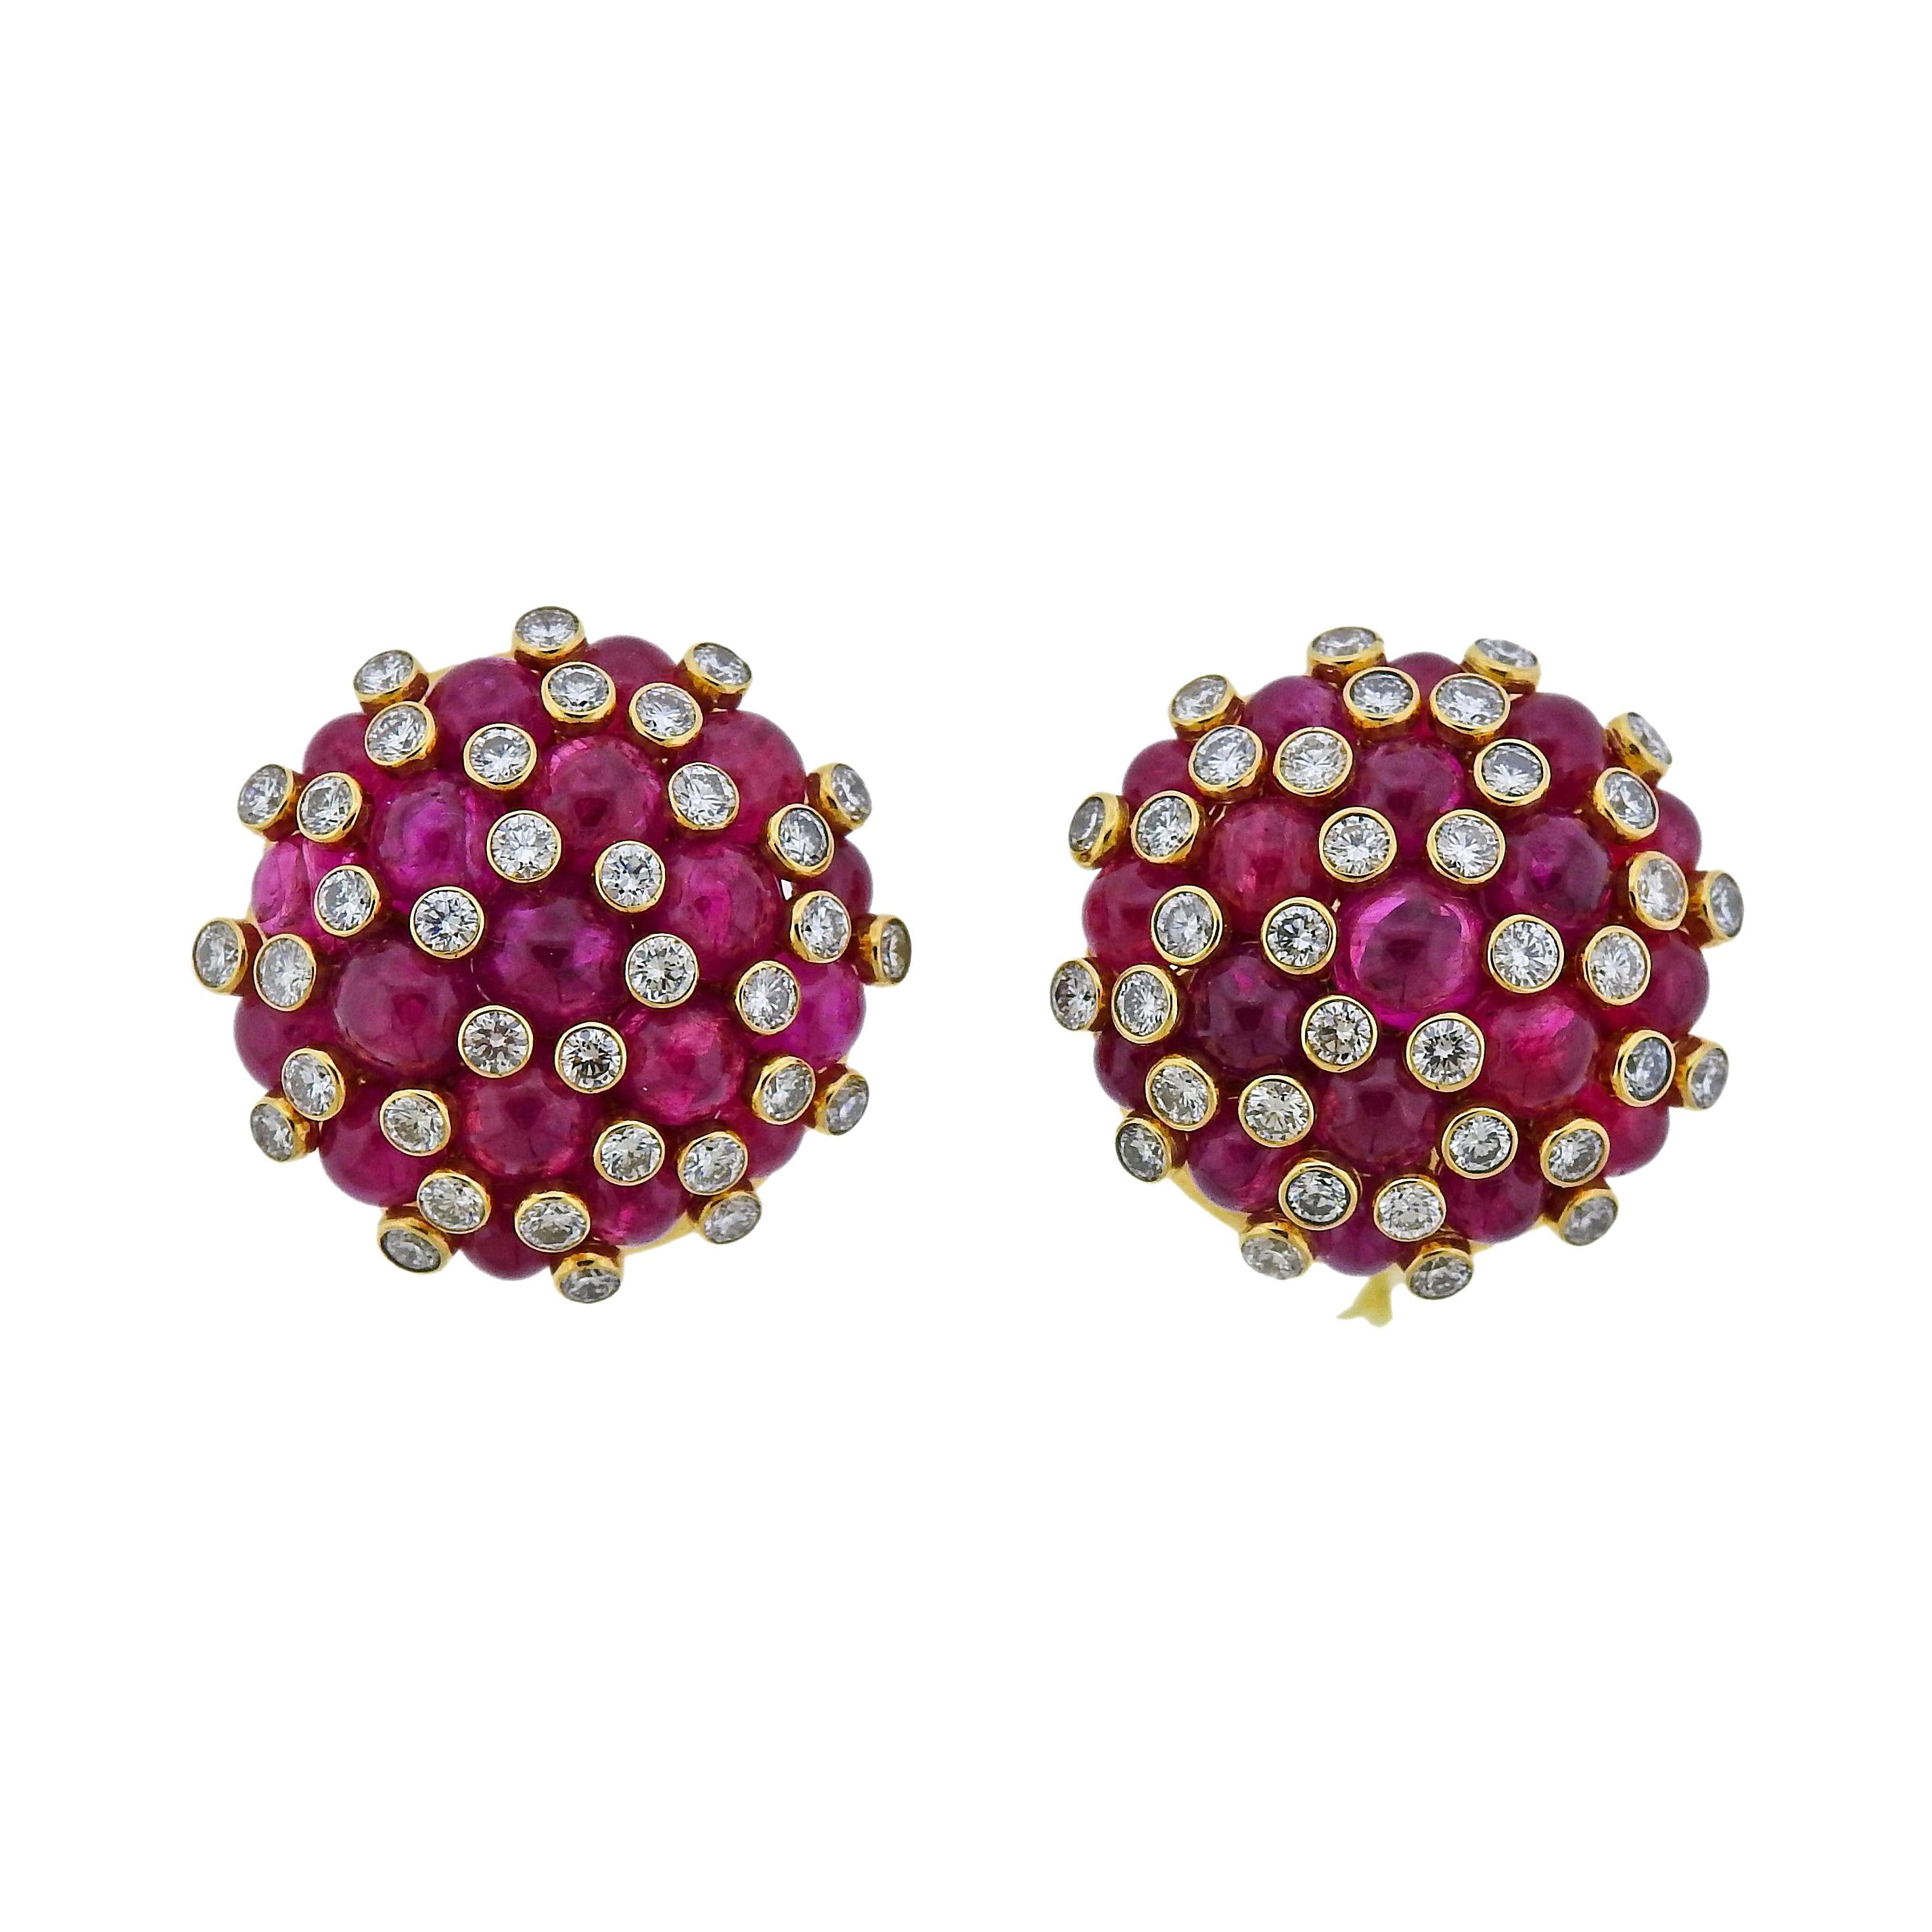 Aletto Brothers 25 Carat Ruby Diamond Gold Strawberry Earrings